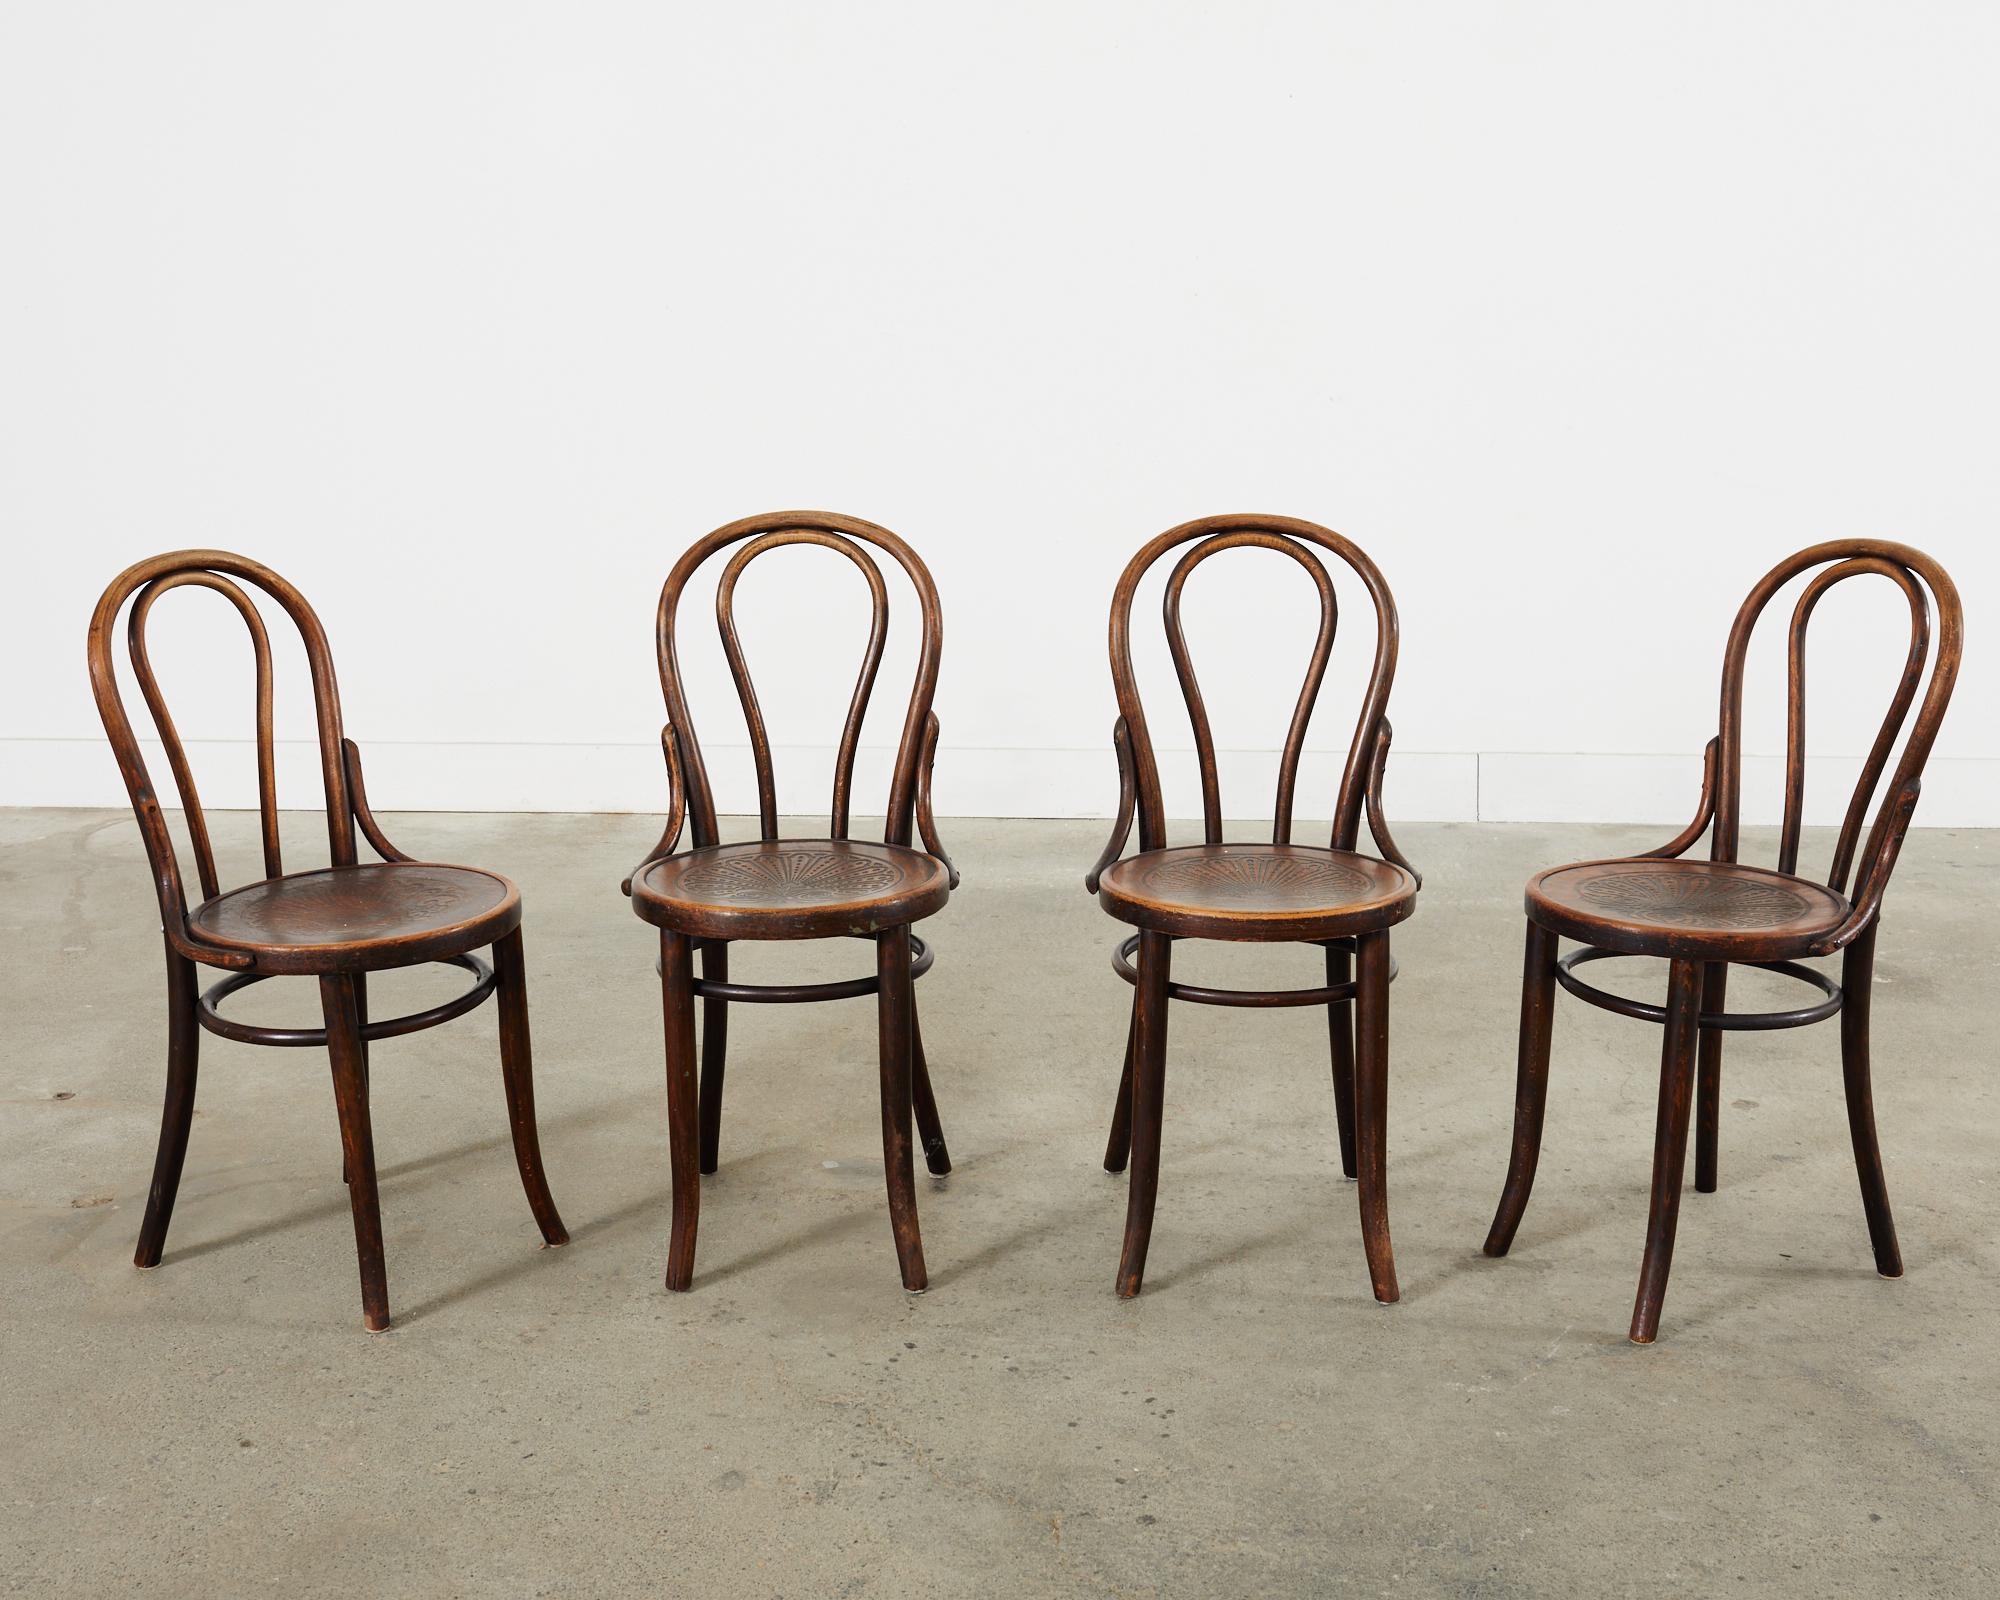 Vienna Secession Set of Four Thonet Labeled Bentwood Cafe Bistro Chairs